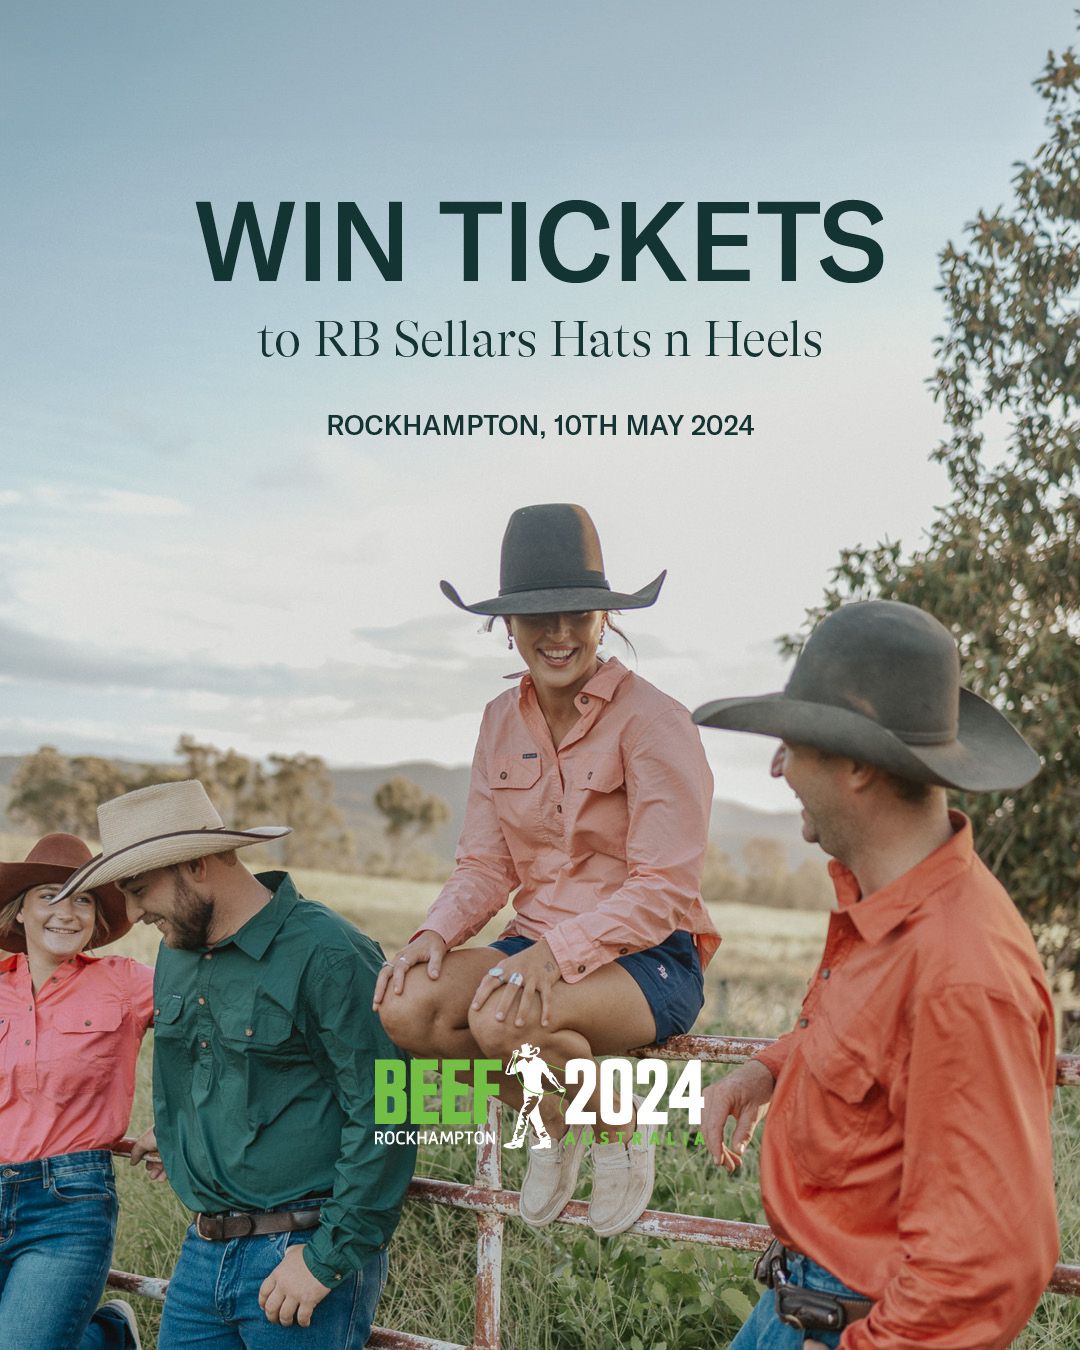 Missed out on tickets to RB Sellars Hats...

To enter, simply:
1. Like this post
2. Tag a friend you’d love to bring with you (more comments = more entries)
3. Ensure you’re following @rb_sellars

+ Bonus entries for those who share this post to their stories

Winner will receive:

Two tickets to RB Sellars Hats n Heels (valued at $300) which includes canapes, drink tickets and General Admission Twilight Pass to Beef Australia 2024 (after 3pm) on Friday 10th of May.

Entries close at 11:59pm AEST Sunday 28th April 2024. Winner will be notified by direct message Monday 29th April 2024.

Please note, this is the official and only RB Sellars account. You will only be notified by @rb_sellars. We will not ask you for any banking details or personal information. All other pages are fakes.

Open to Australian residents only. Prize does not include travel or accommodation to and from Rockhampton. This competition is not sponsored, endorsed or administered, or associated with Instagram.